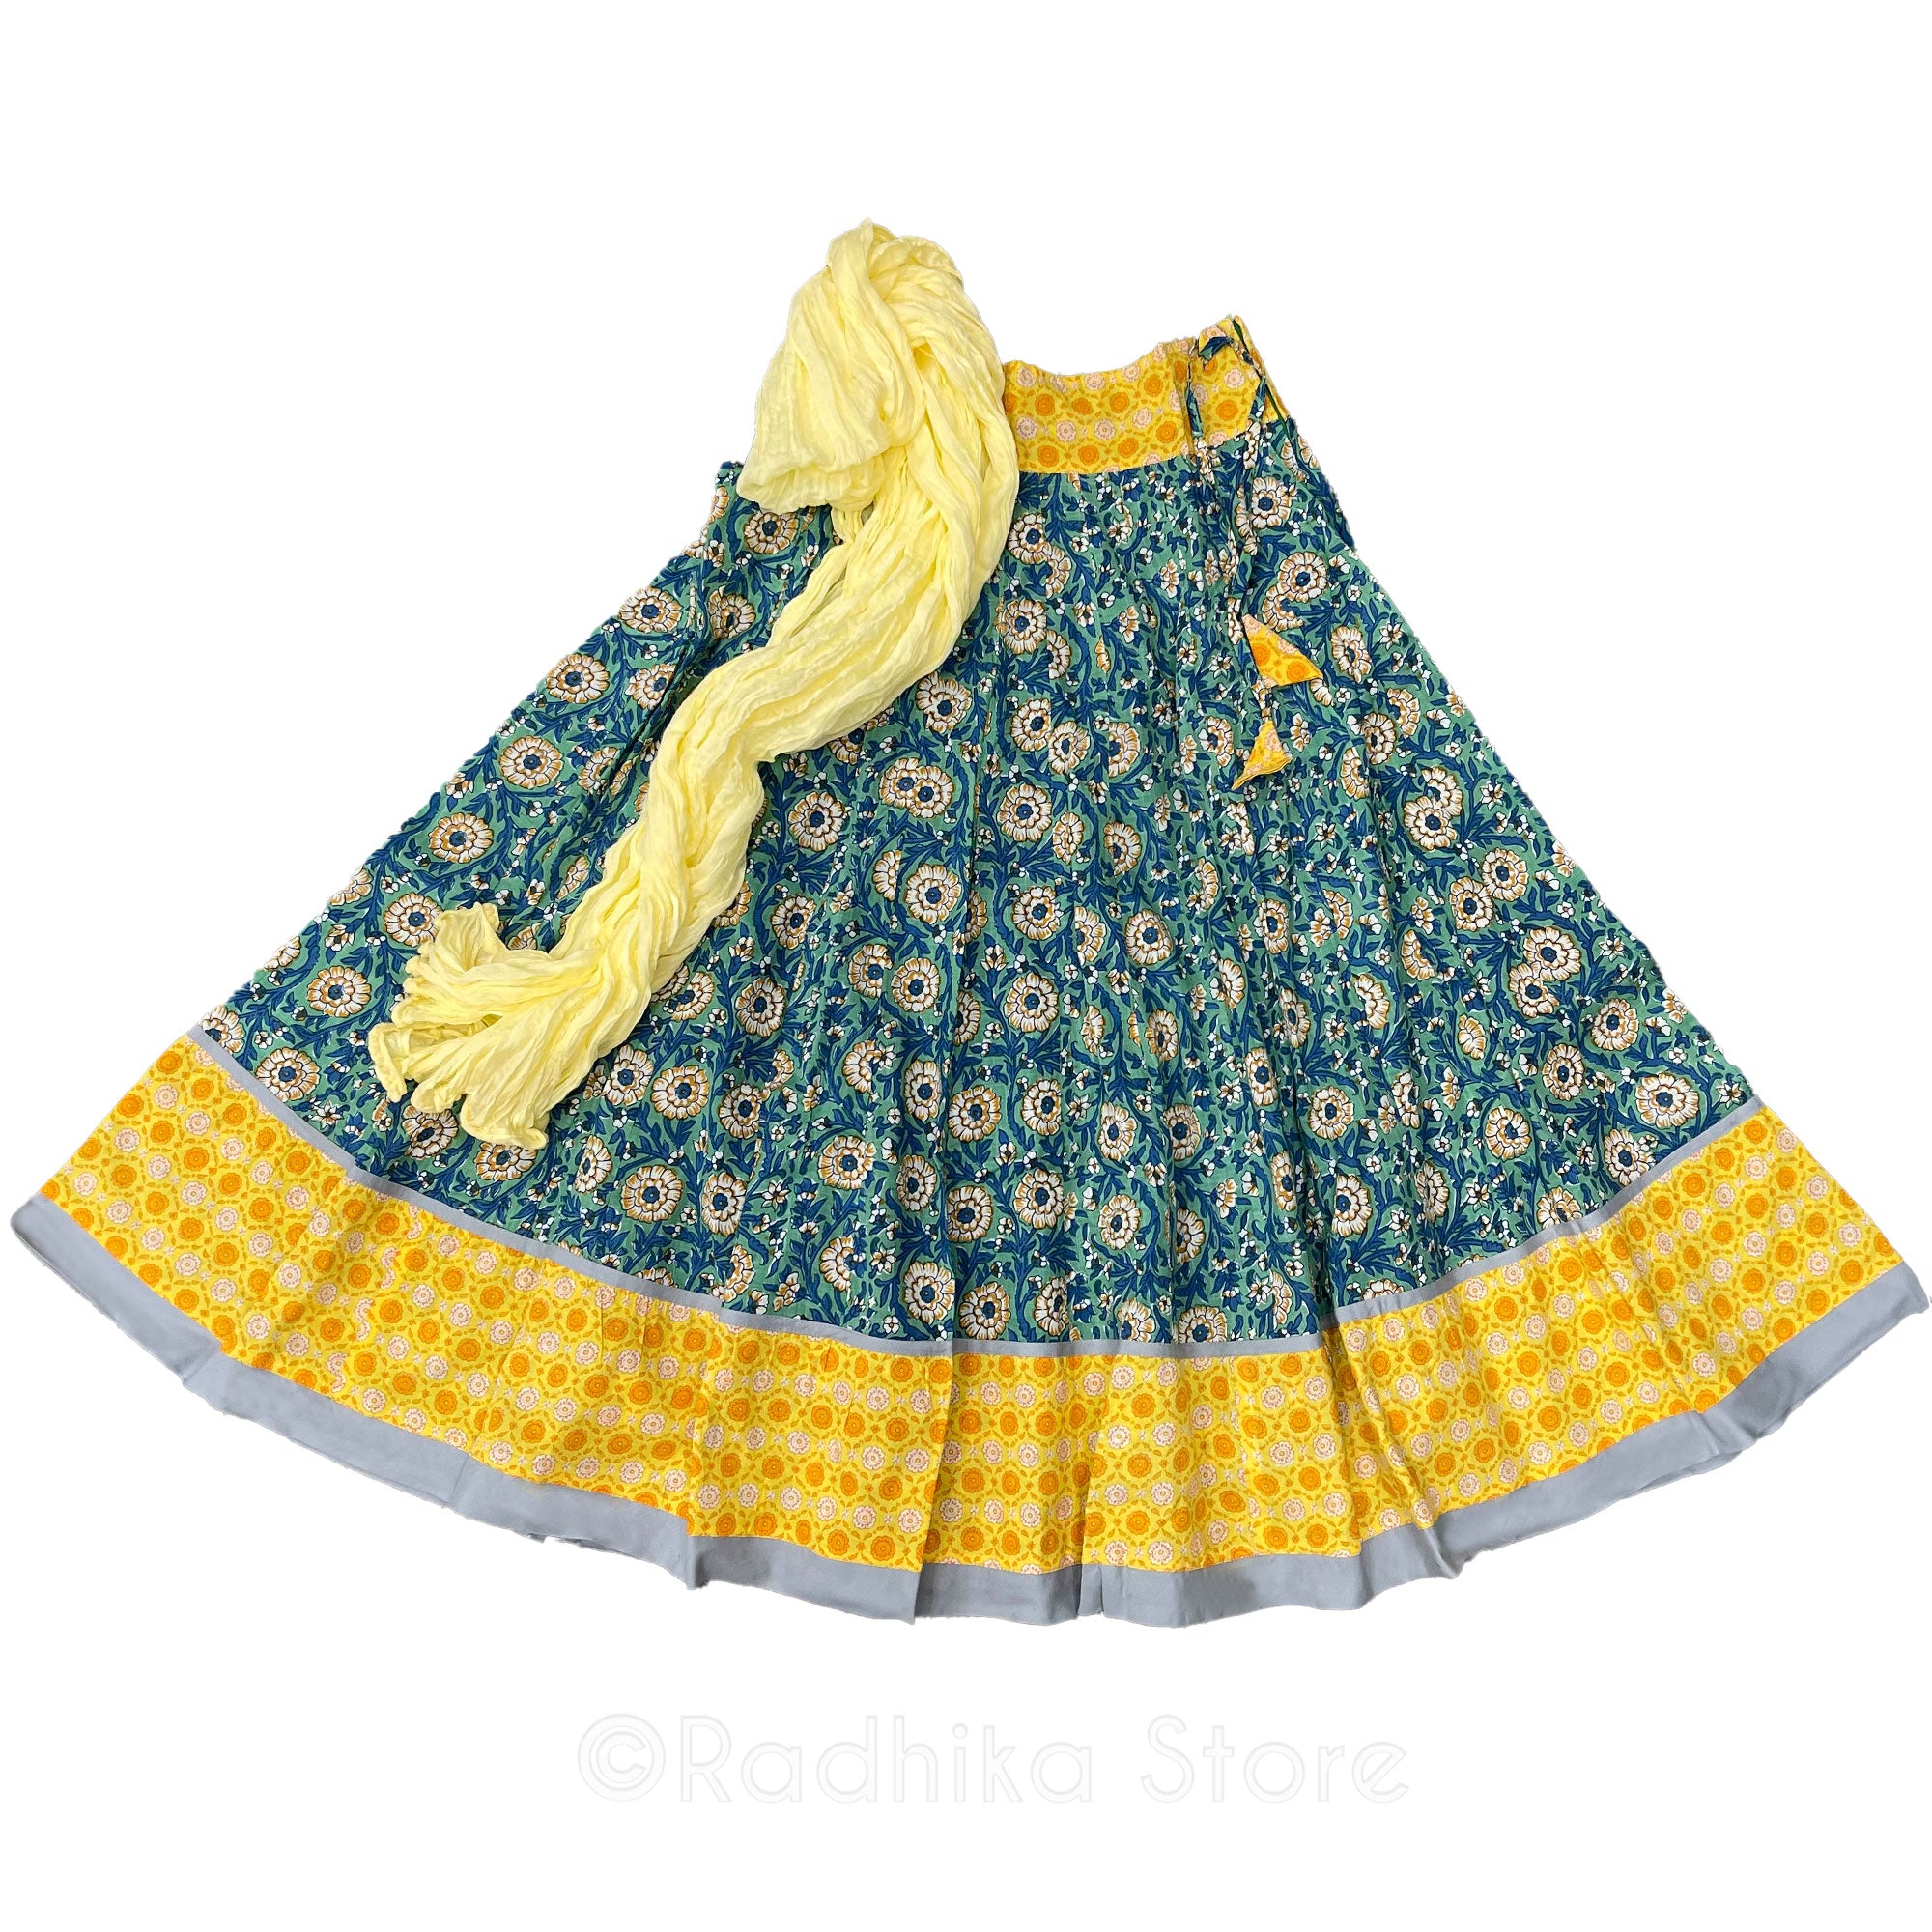 Temple Garden -  Gopi Skirt - Blues and yellows - Cotton Screen Print Fabric - With Cotton Chadar - Small and Large